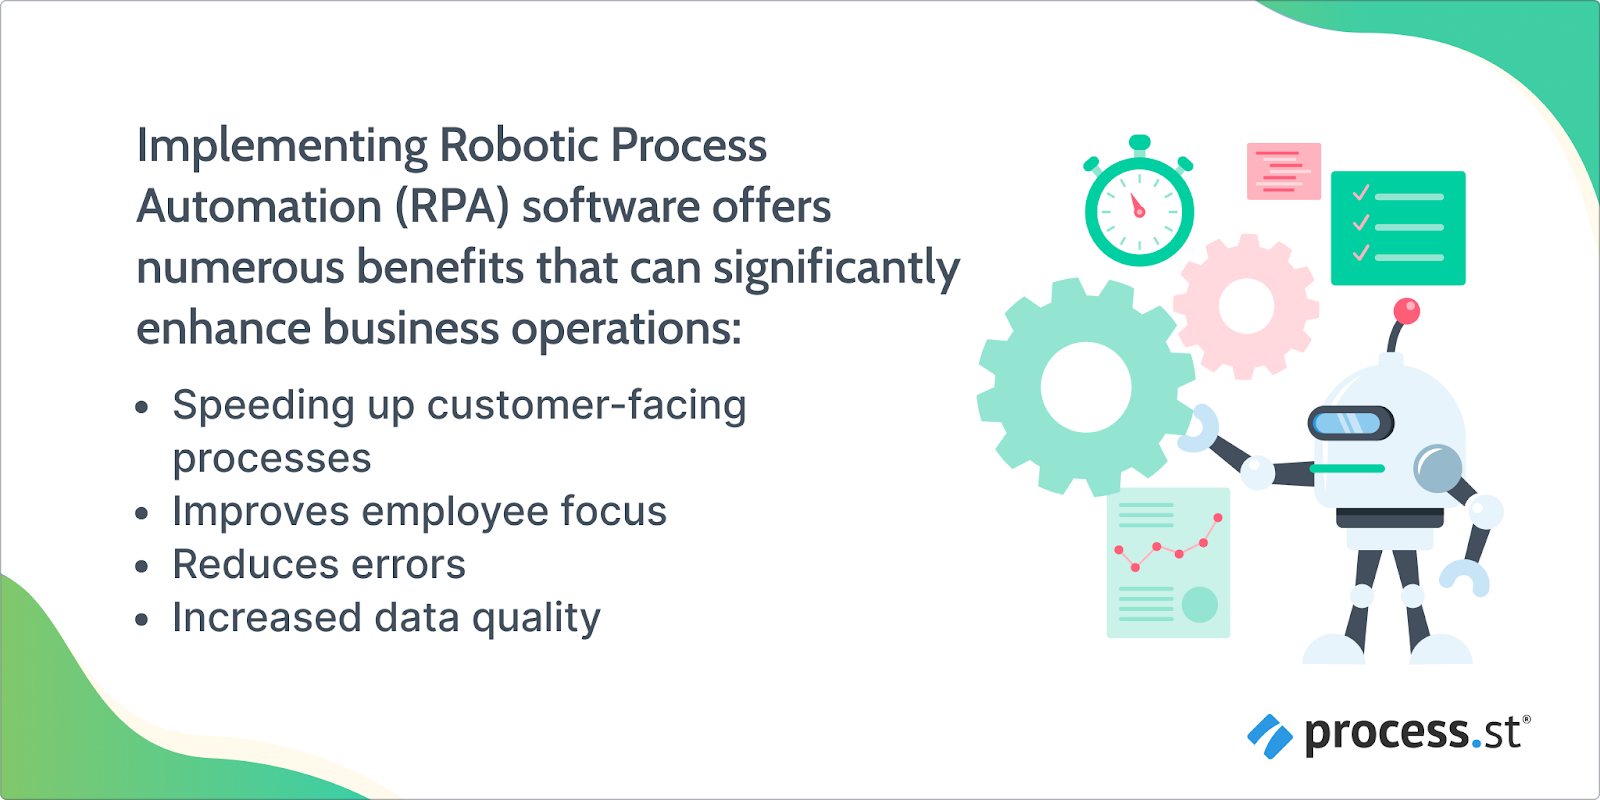 image showing the benefits of RPA software